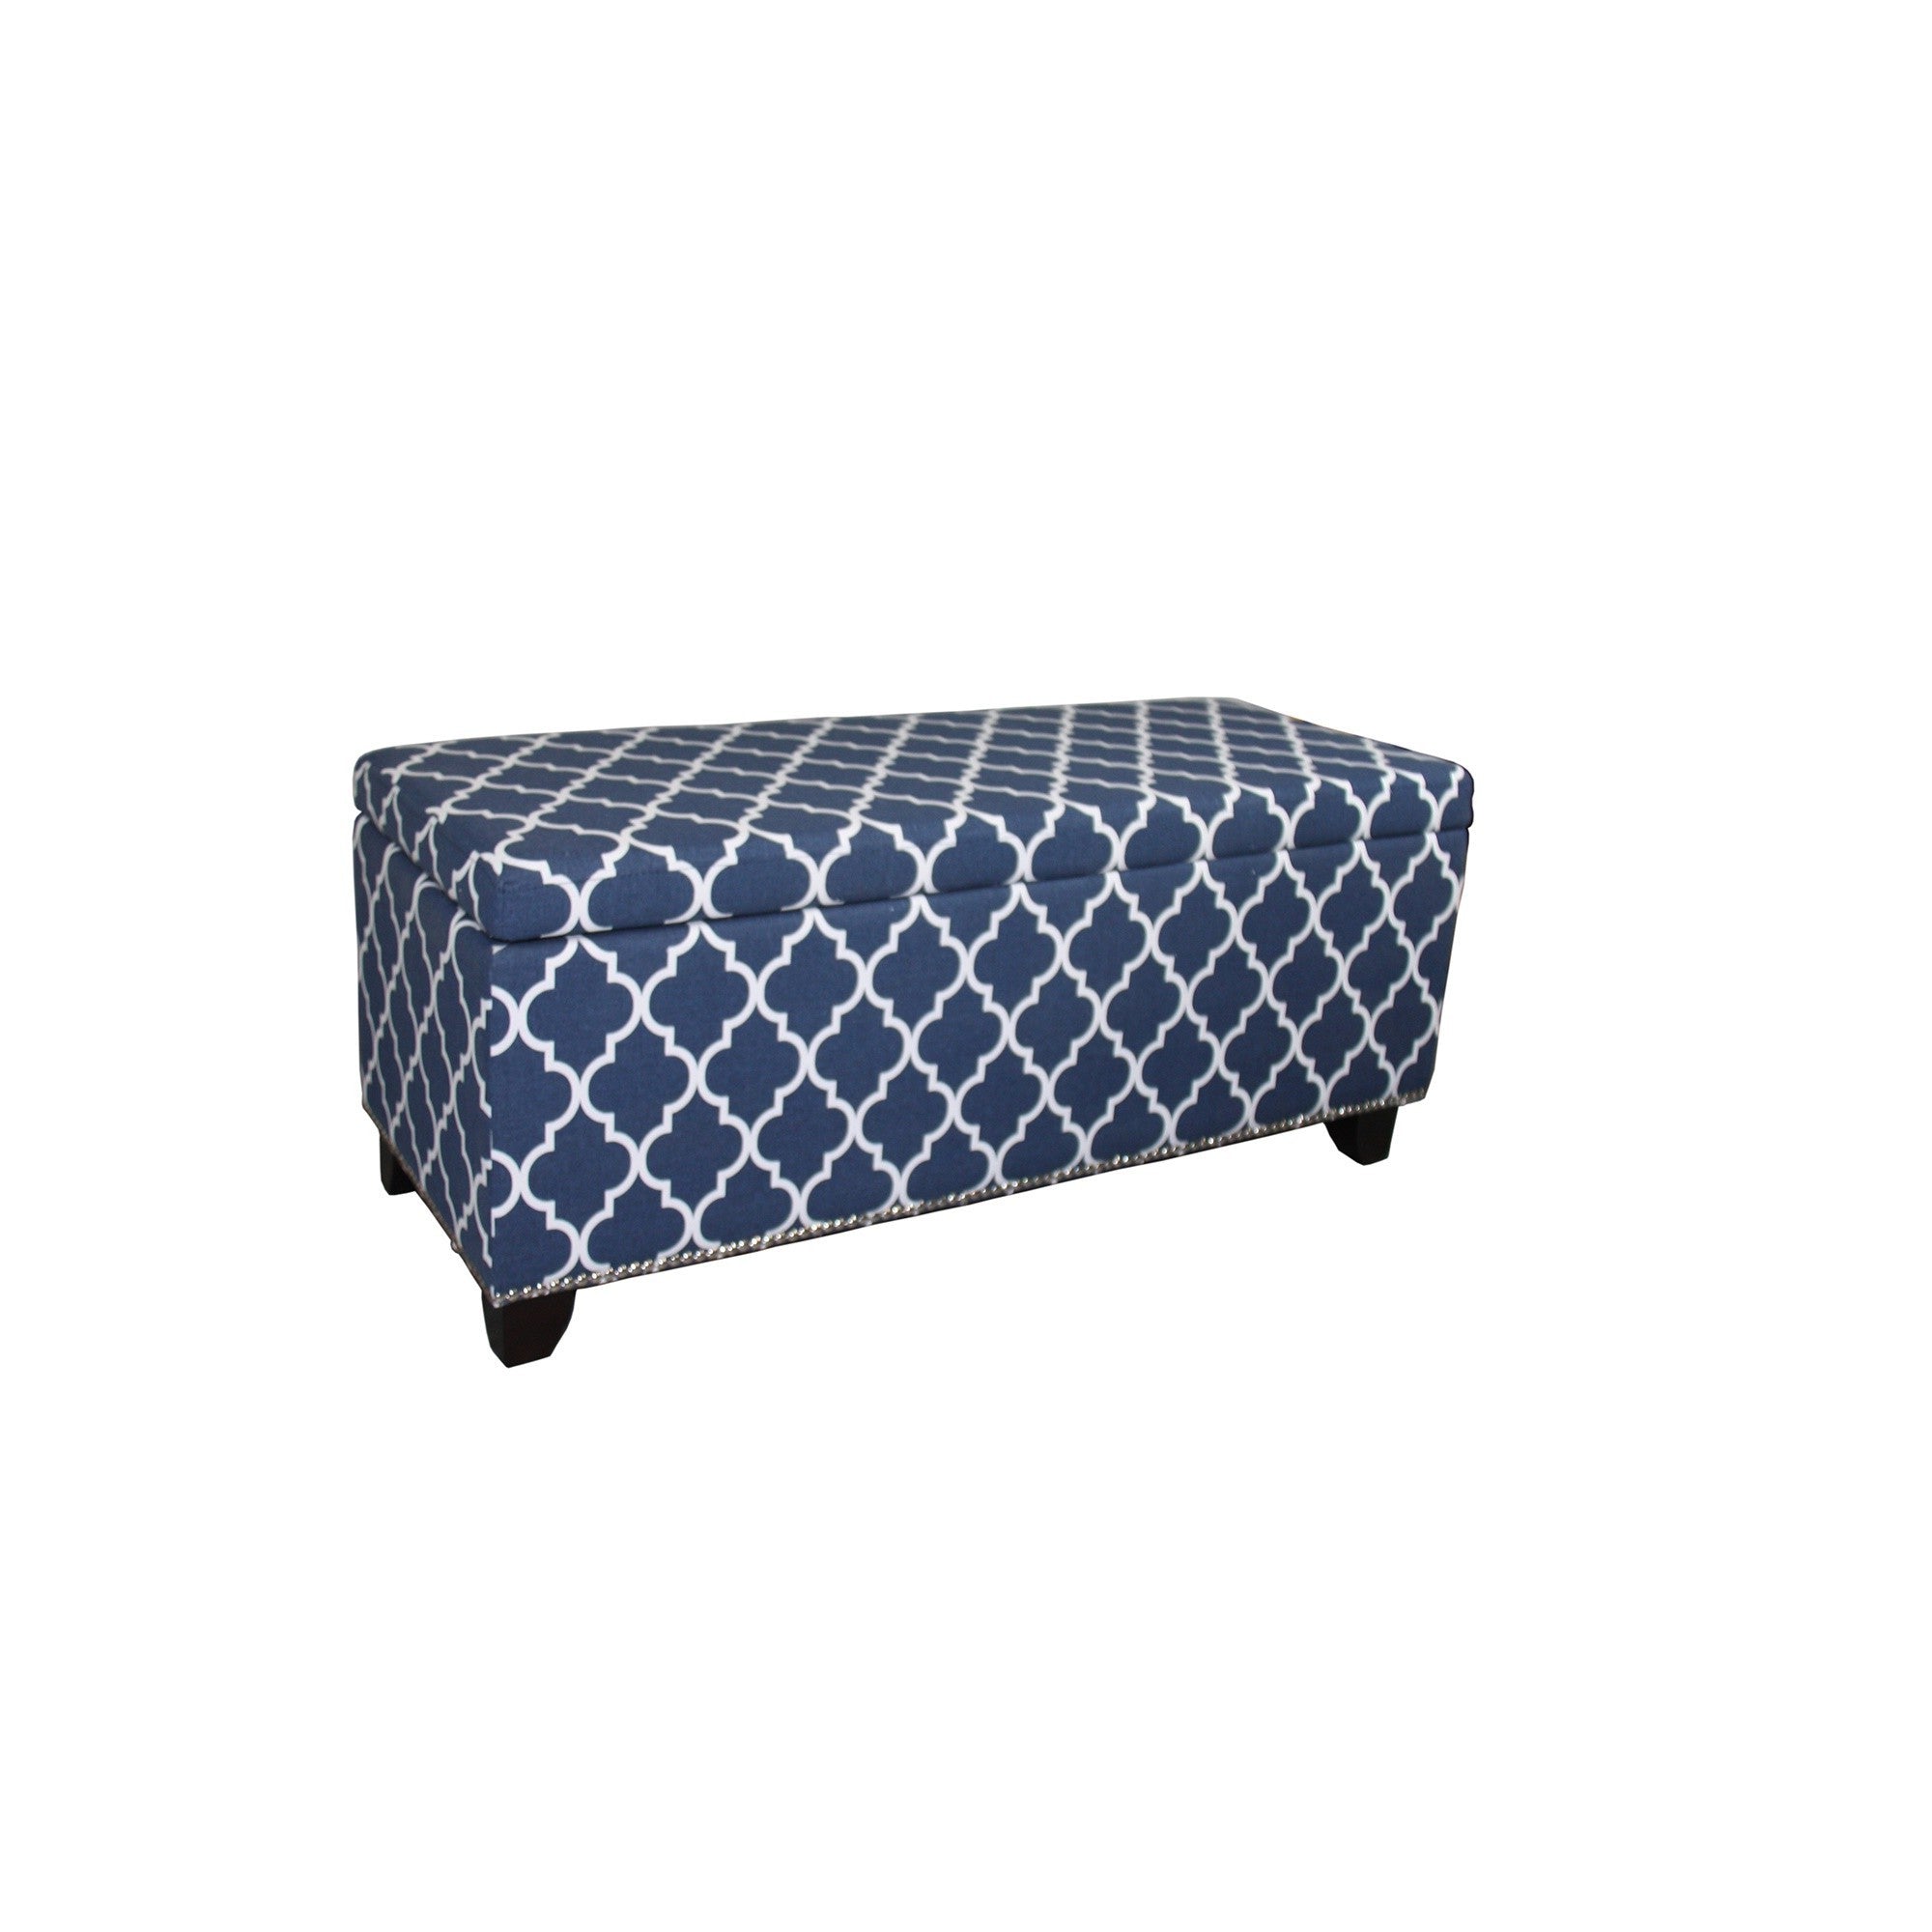 42" Blue and White and Dark Brown Upholstered Polyester Quatrefoil Bench with Flip top